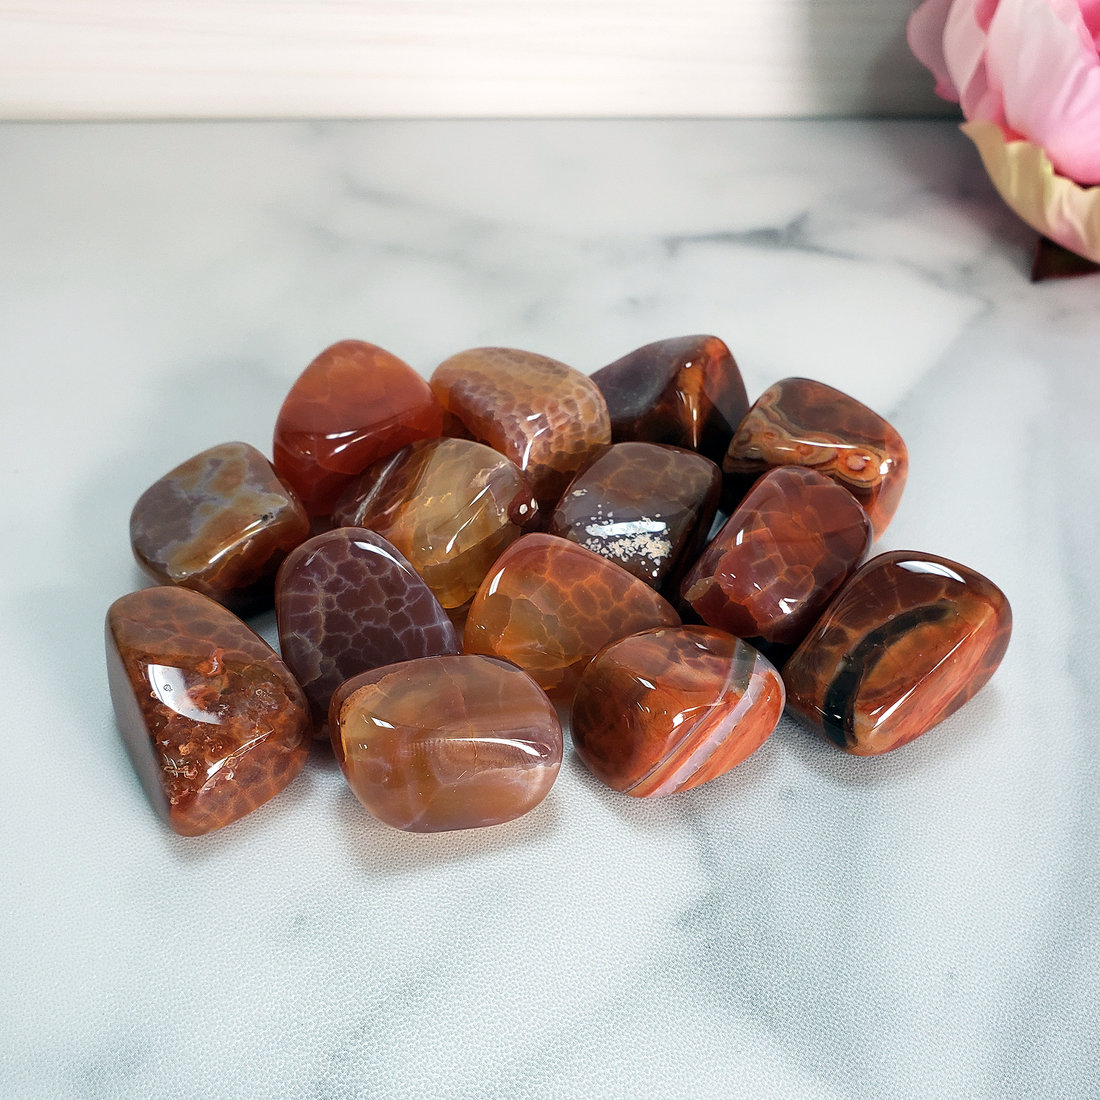 Fire Agate Natural Tumbled Crystal - One Stone - On Tile 2